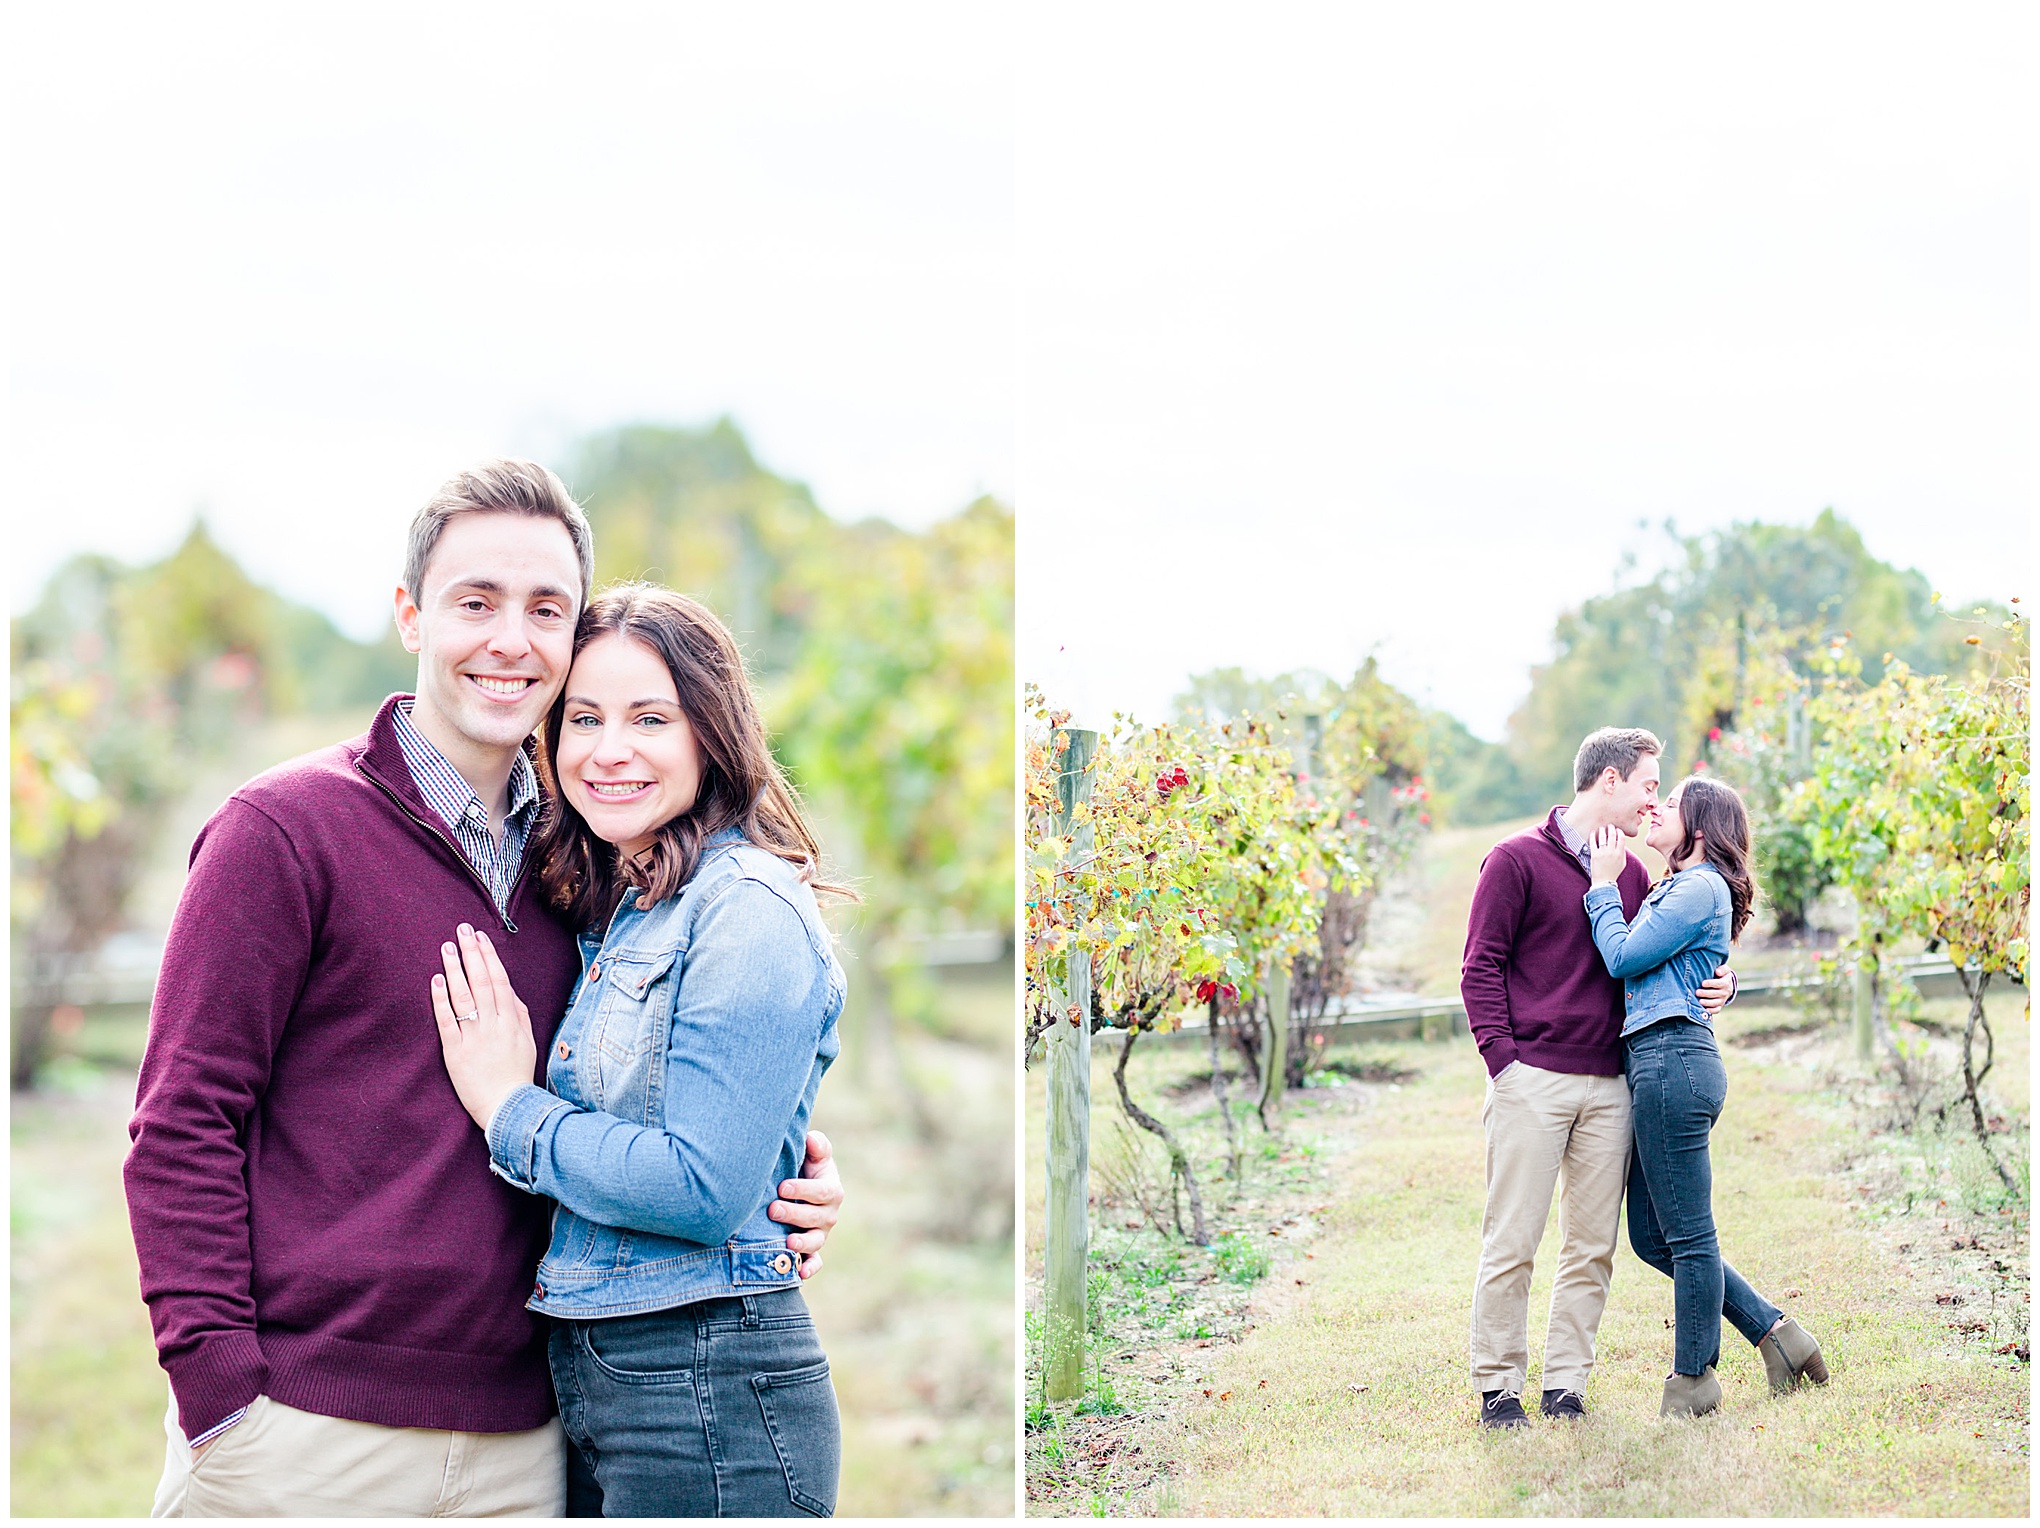 Running Hare Vineyard surprise proposal, Maryland winery, Maryland proposal photographer, D.C. proposal photographer, Maryland engagement, surprise proposal, Running Hare Vineyard proposal, Running Hare Vineyard, D.C. wedding photographer, Rachel E.H. Photography, autumn proposal, autumn surprise proposal, couple kissing